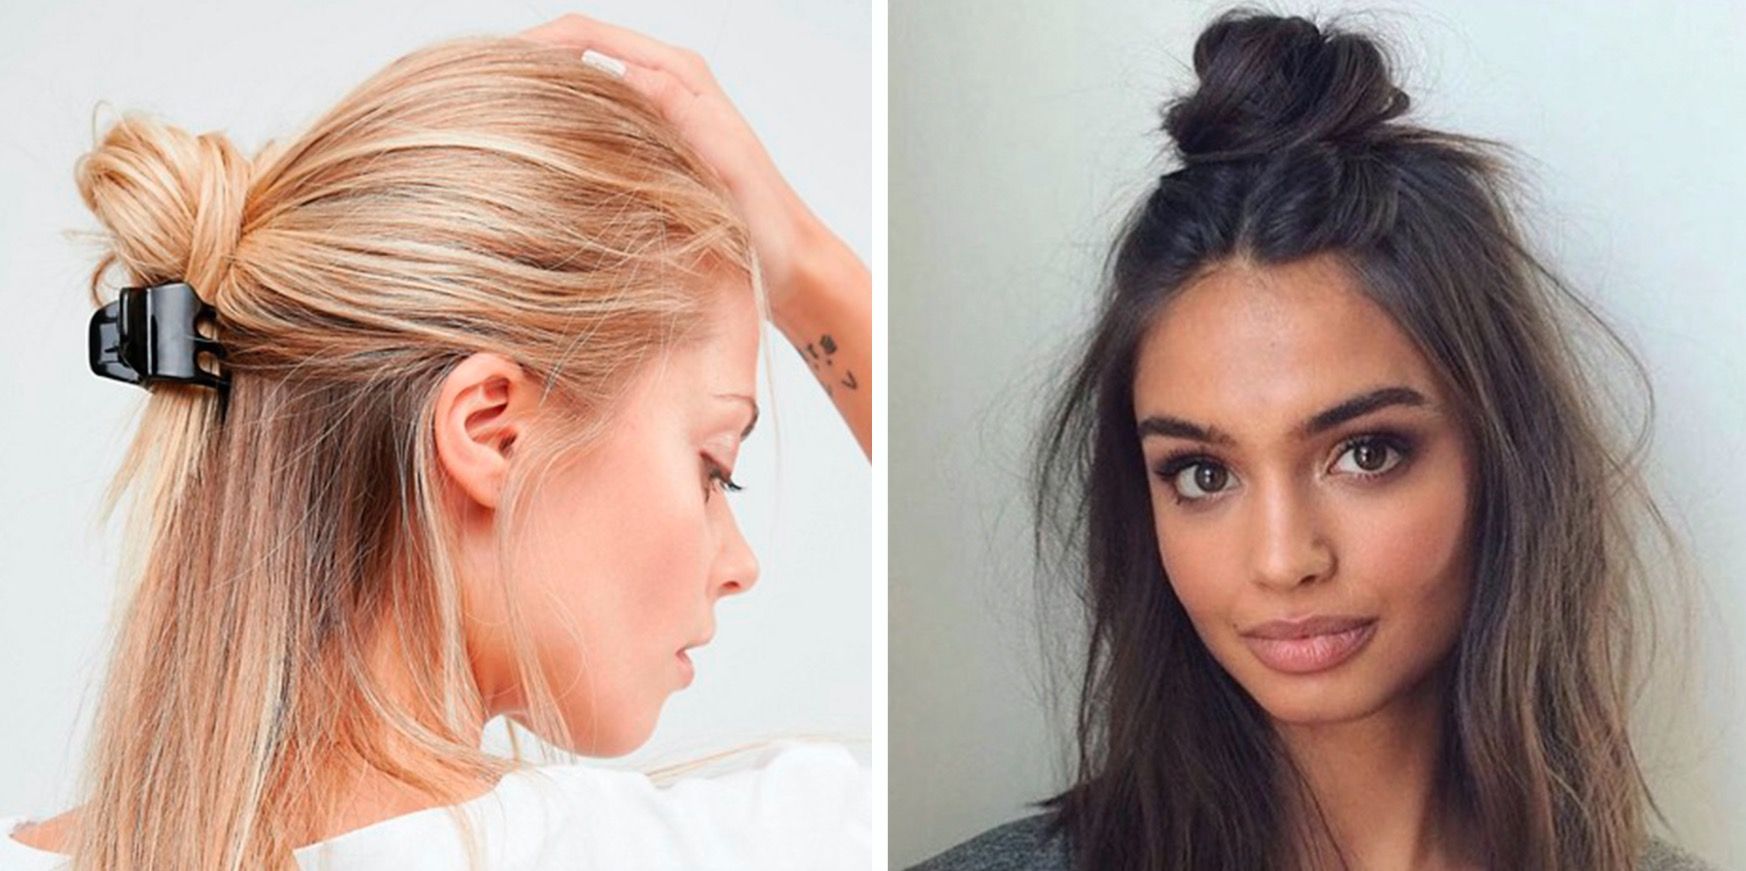 hairstyles for greasy hair: 12 ways to disguise oily roots